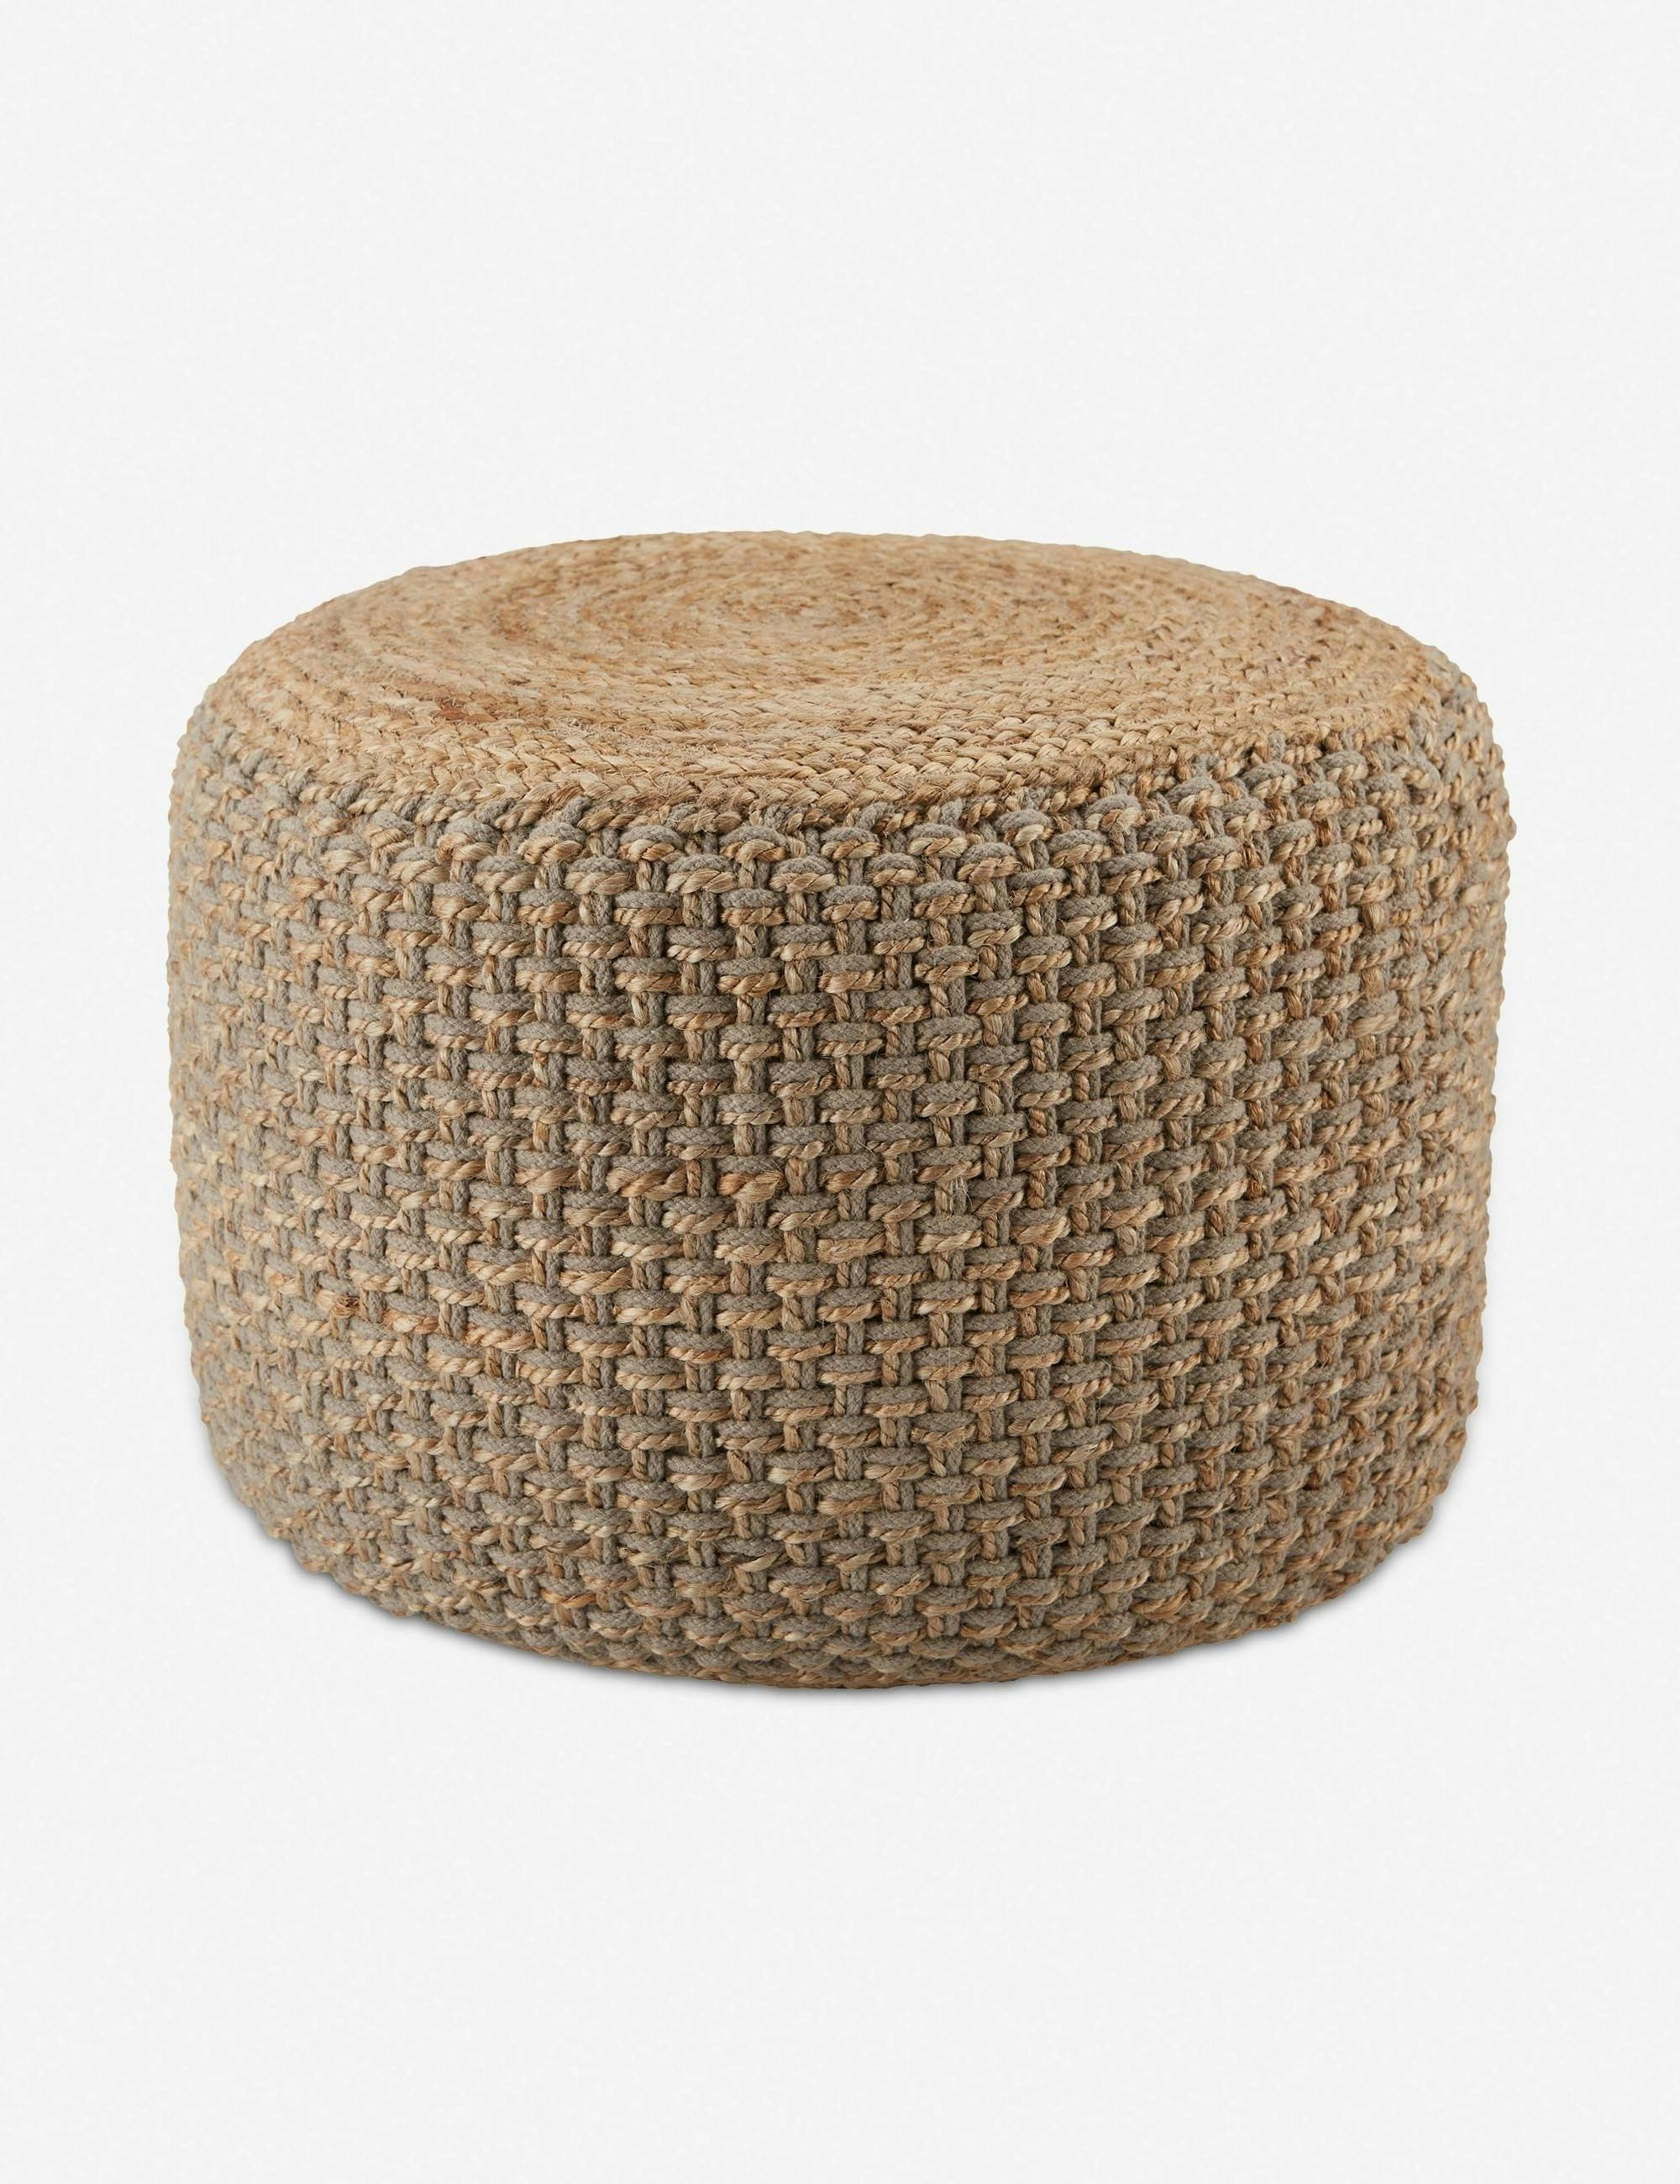 Kealani Handwoven Jute and Cotton Round Pouf in Gray/Beige